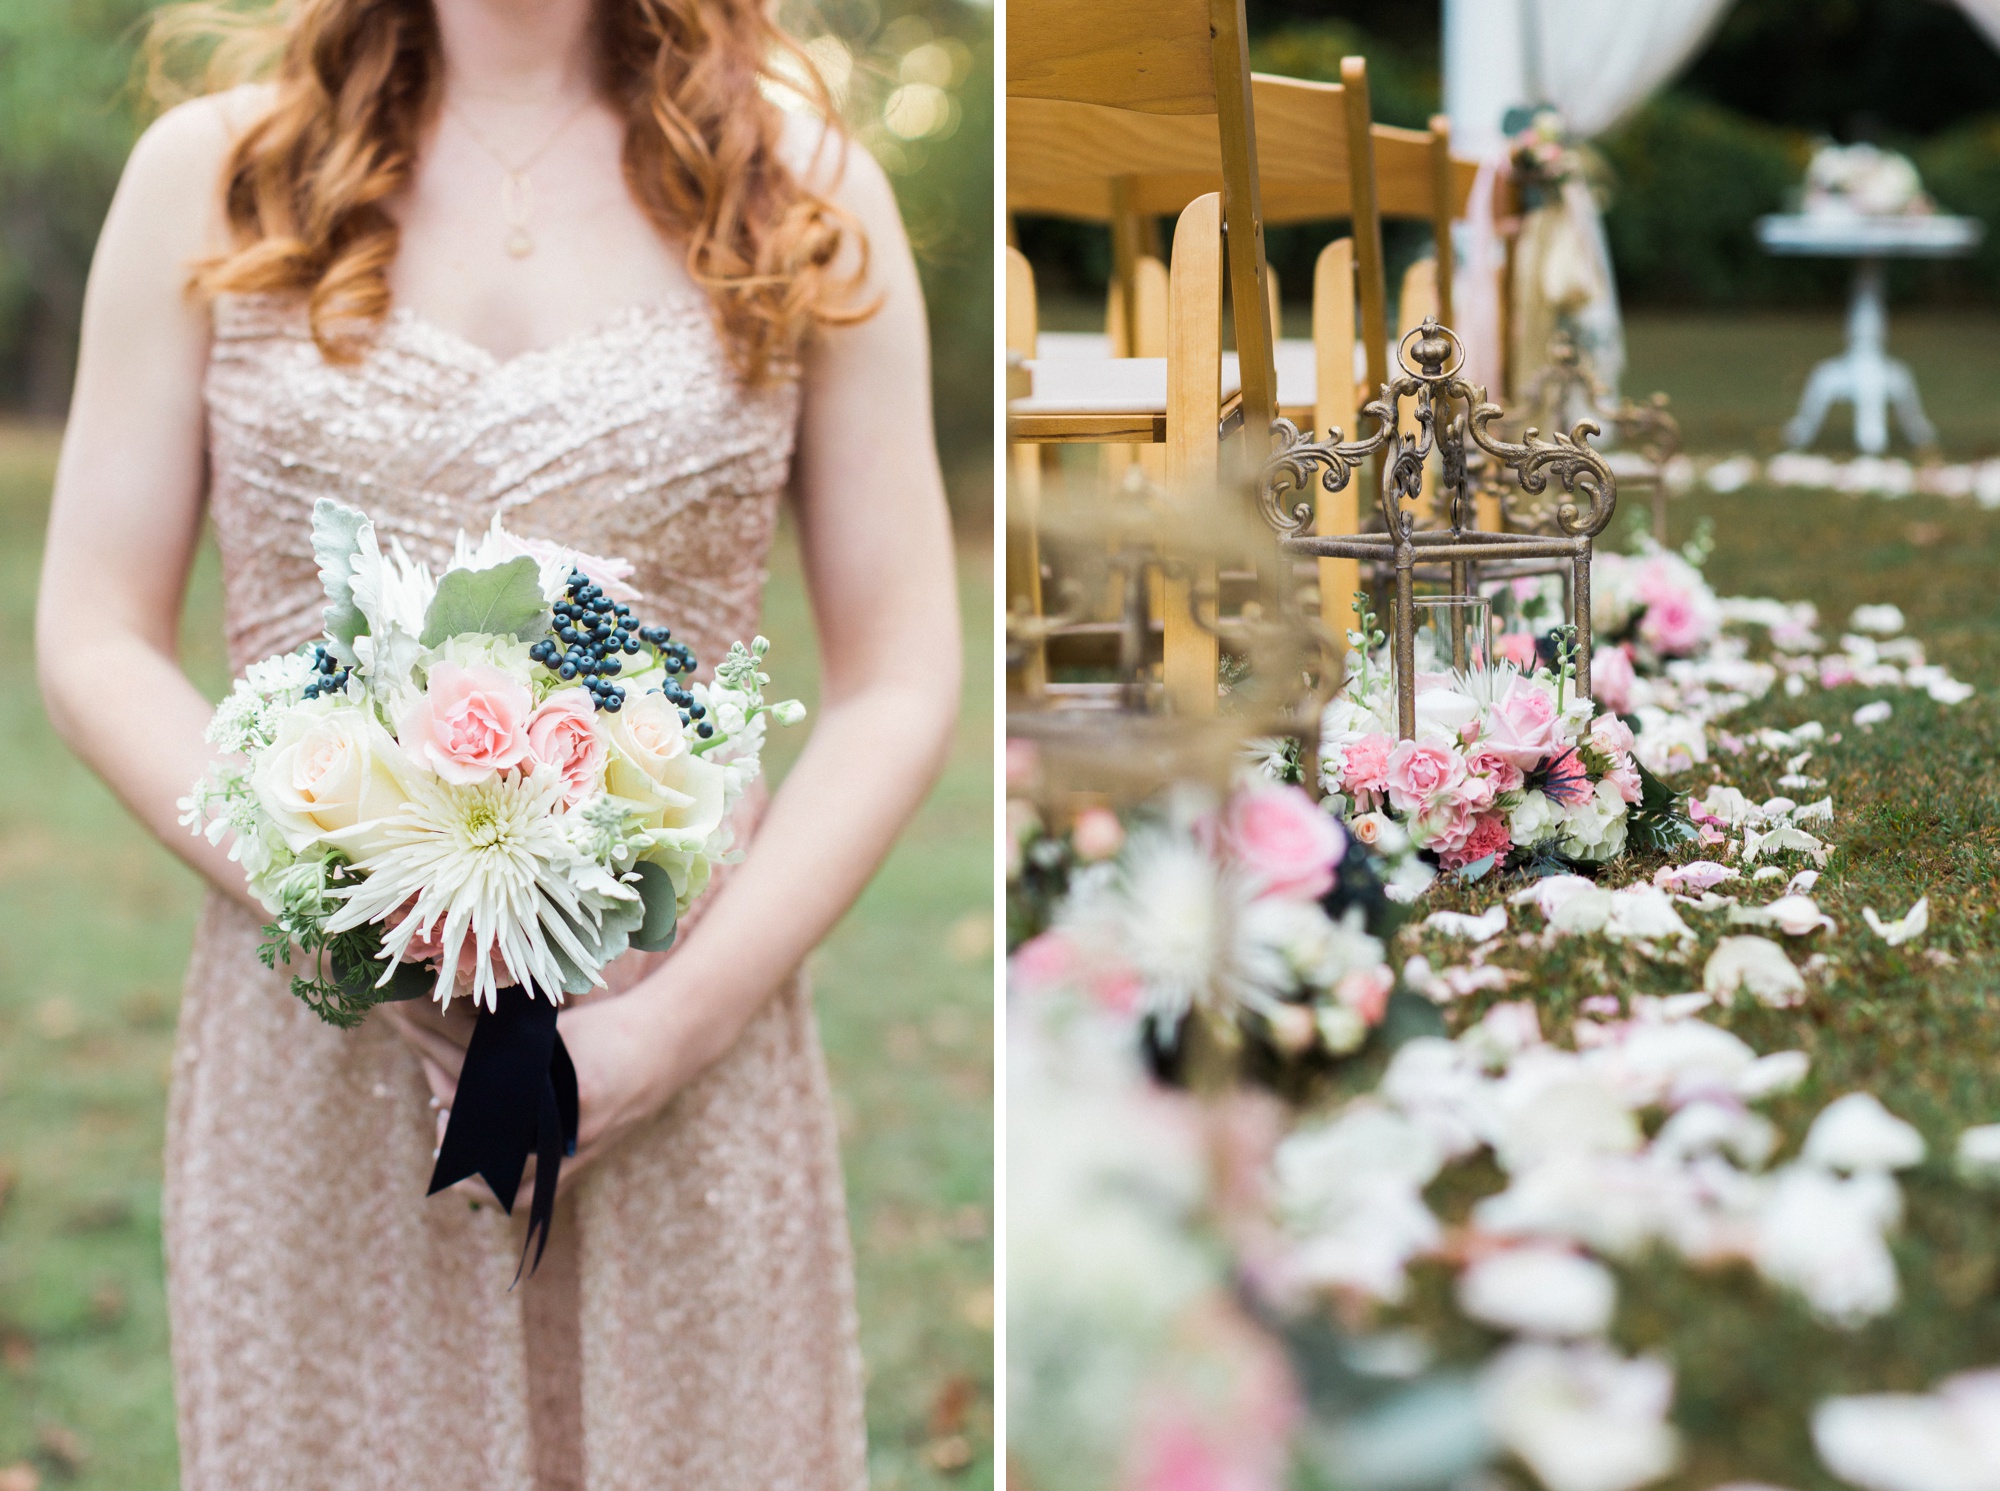 These aisle flowers were dripping with luxury and femininity!